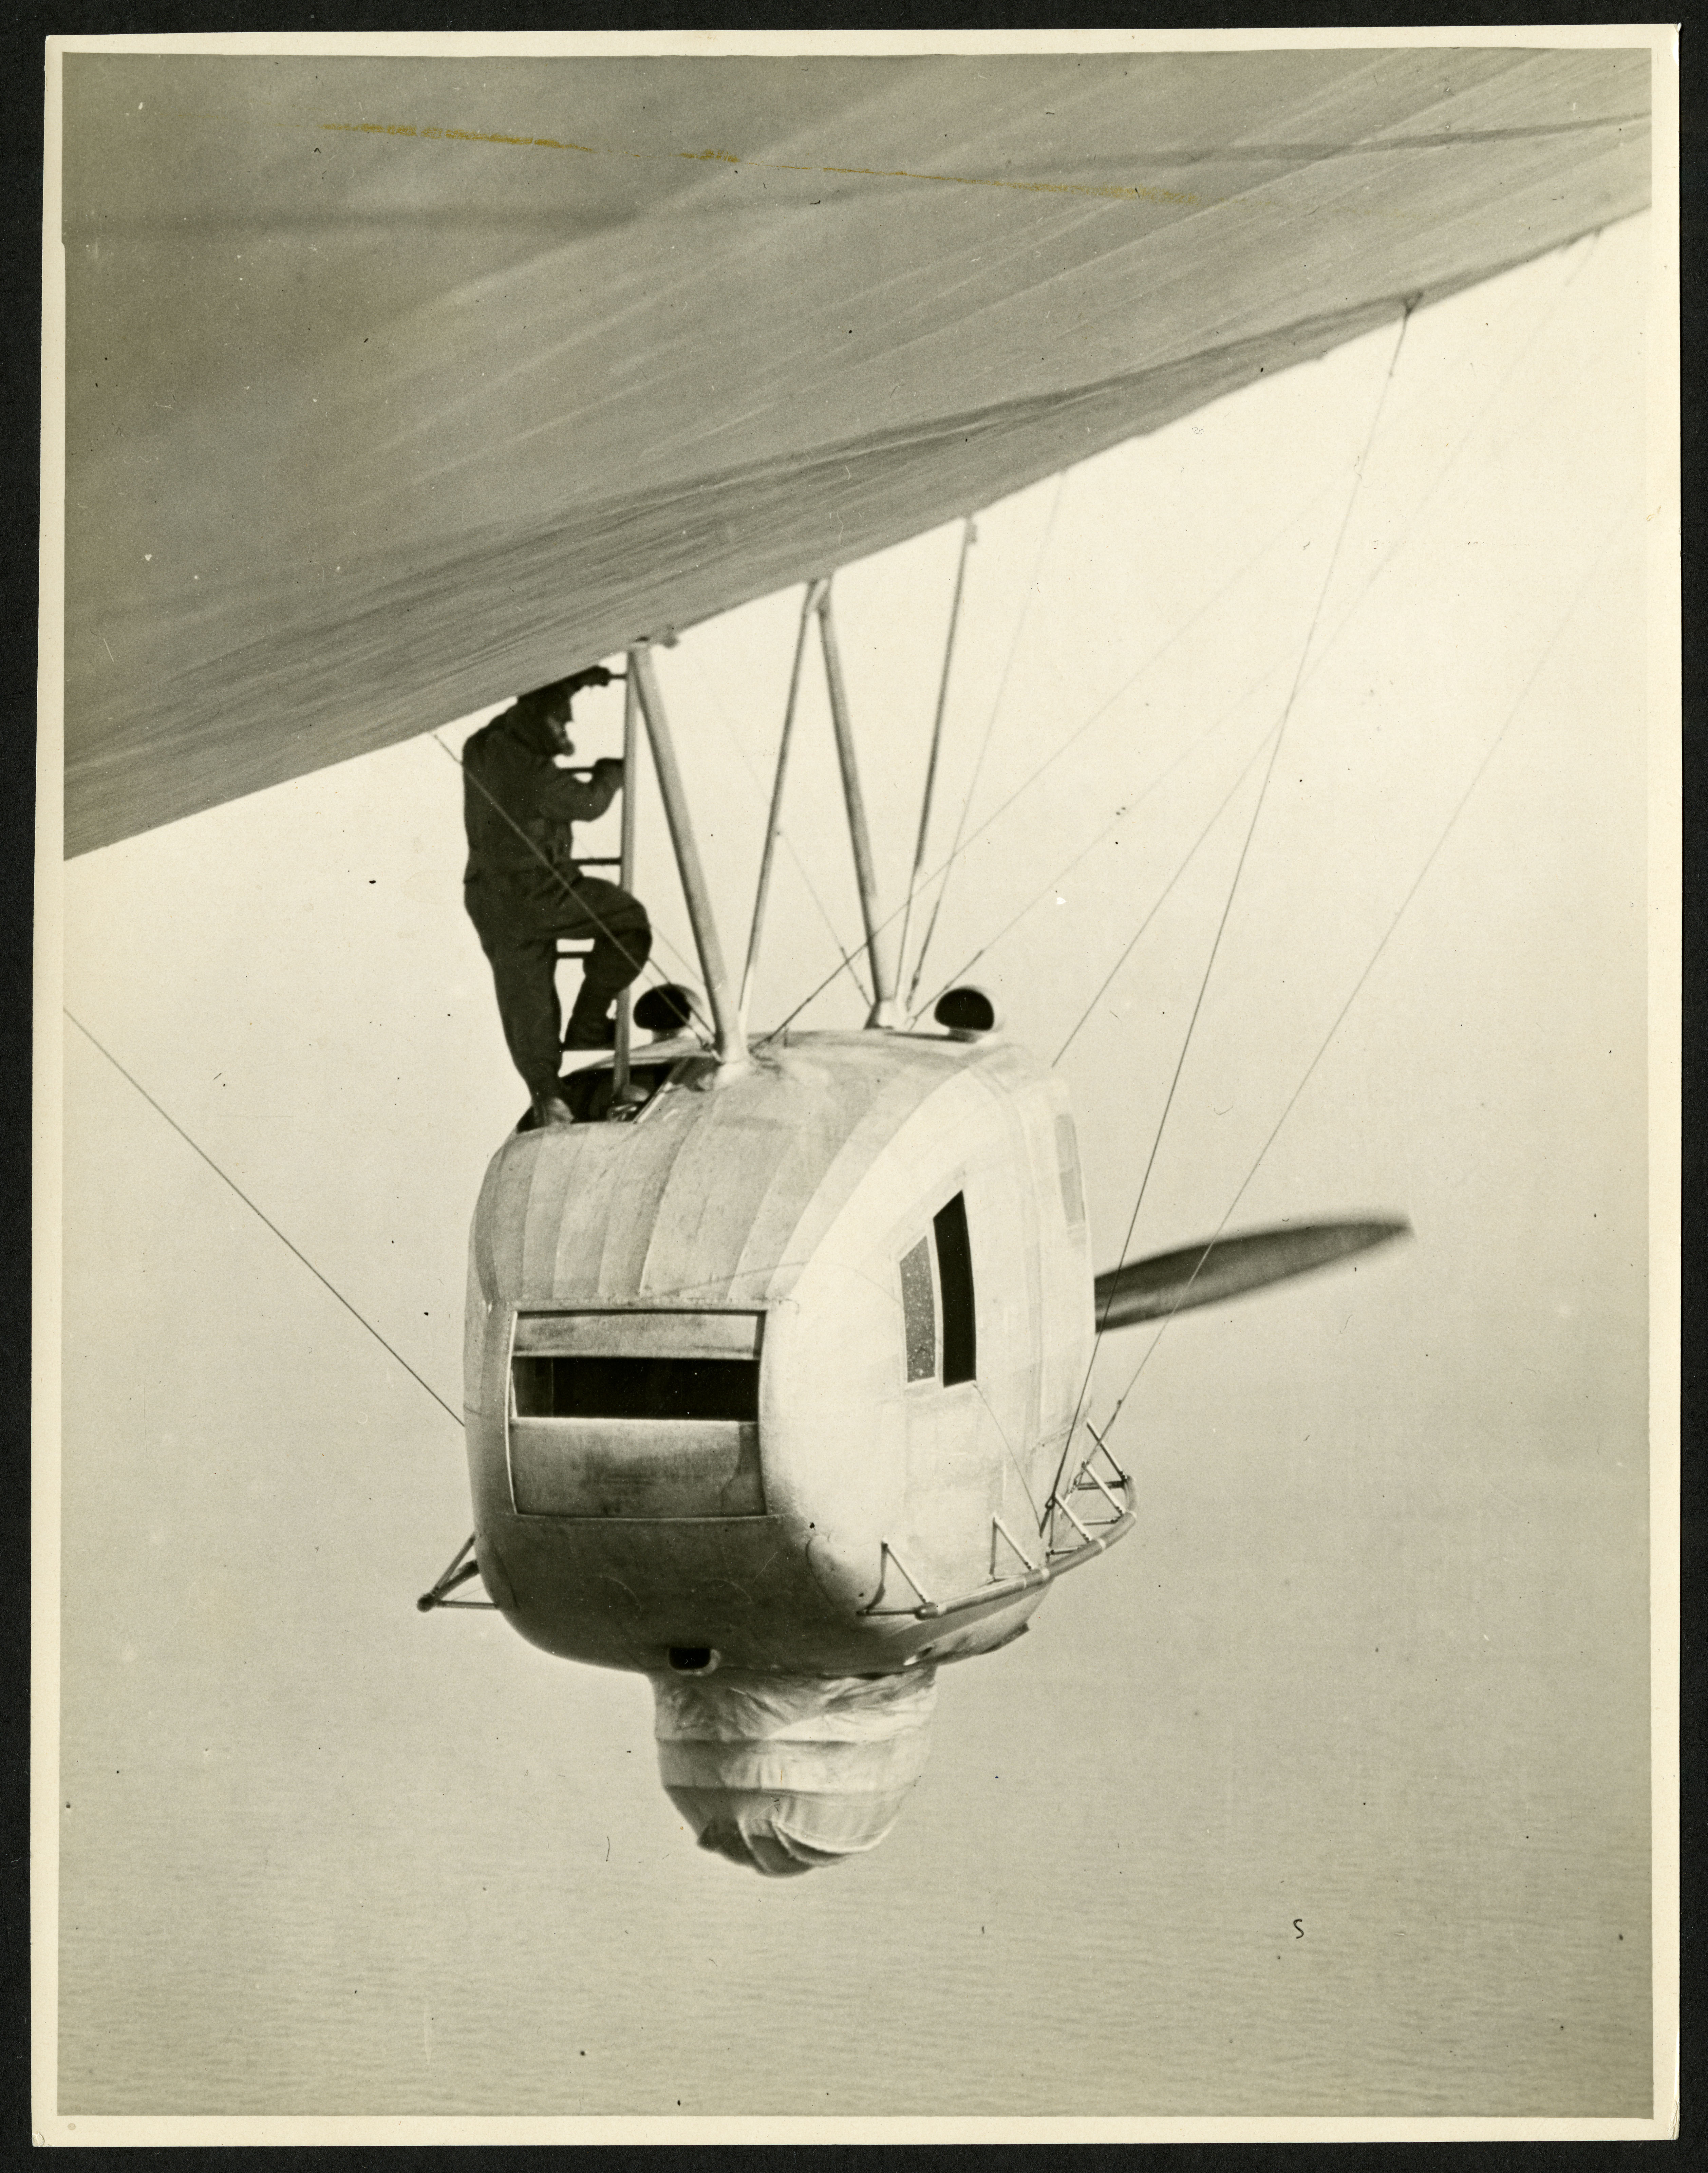 Photographer Walter Leroy Richardson heading into the observation basket of the dirigible.